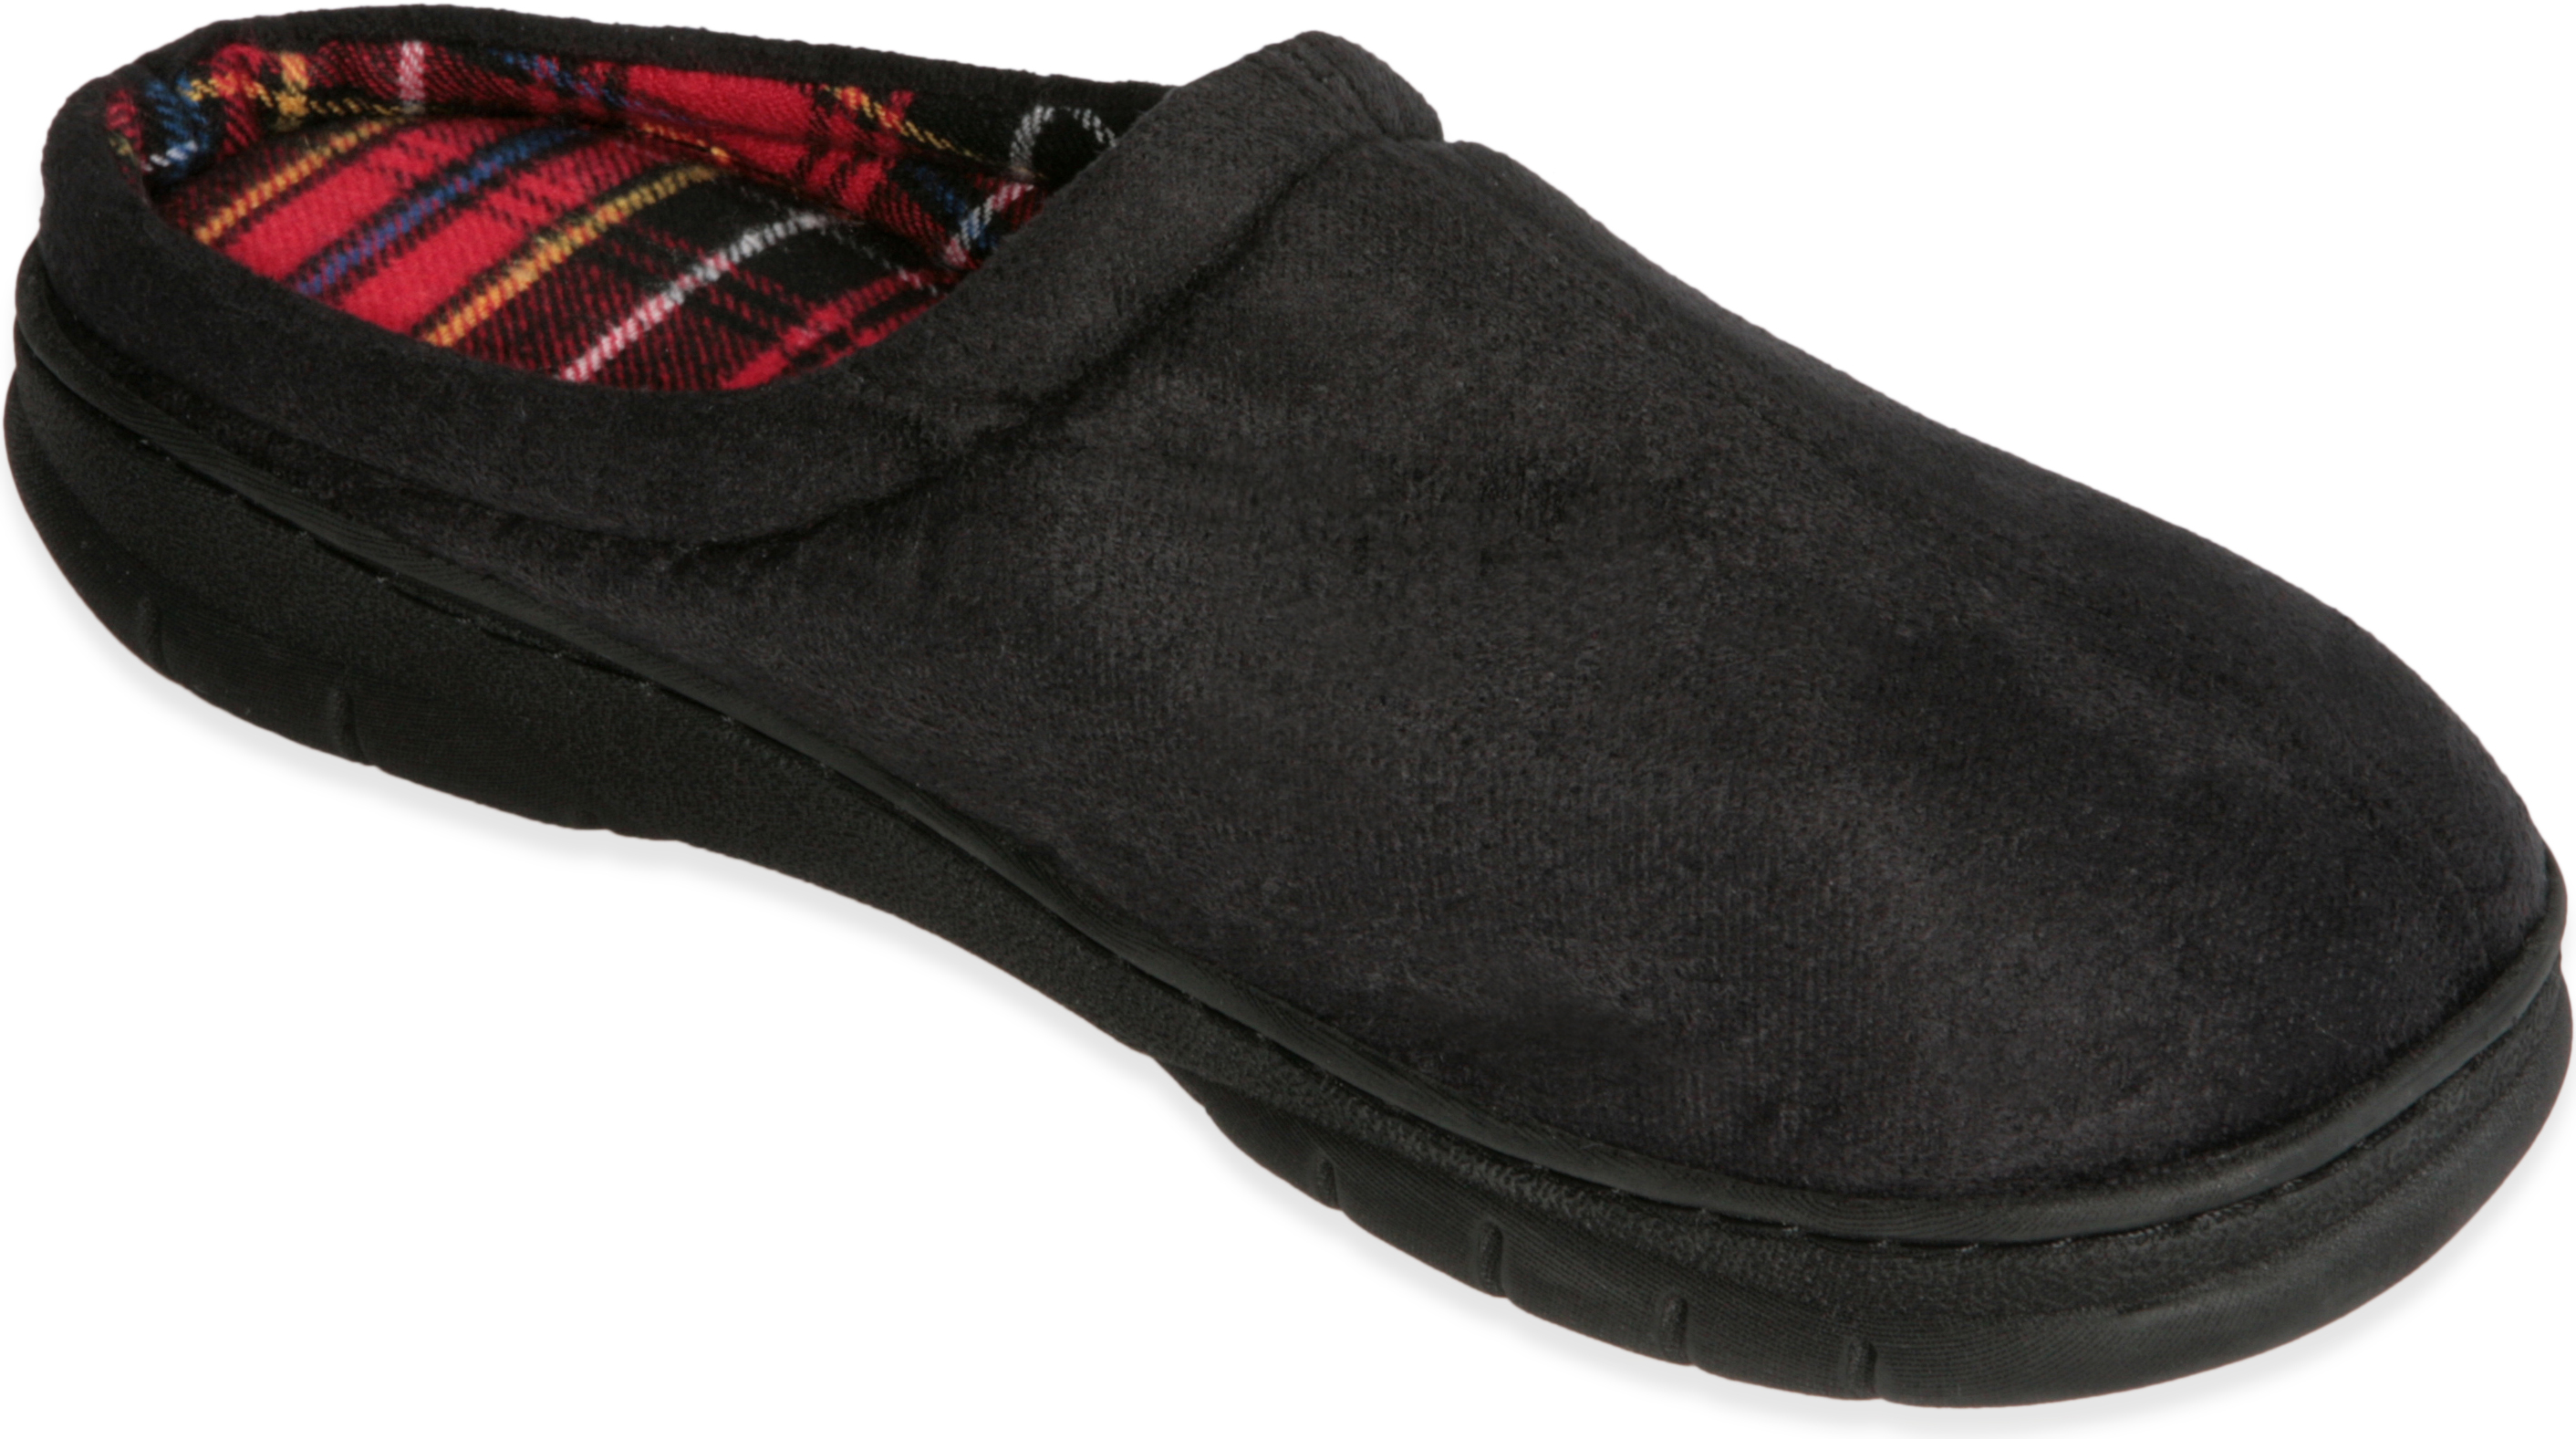 Deluxe Comfort Men's Memory Foam Slipper, Size 13-14 – Suede Vamp Checkered Lining – Memory Foam Insole – Strong TPR Outsole – Men's Slippers, Black Suede - image 1 of 5